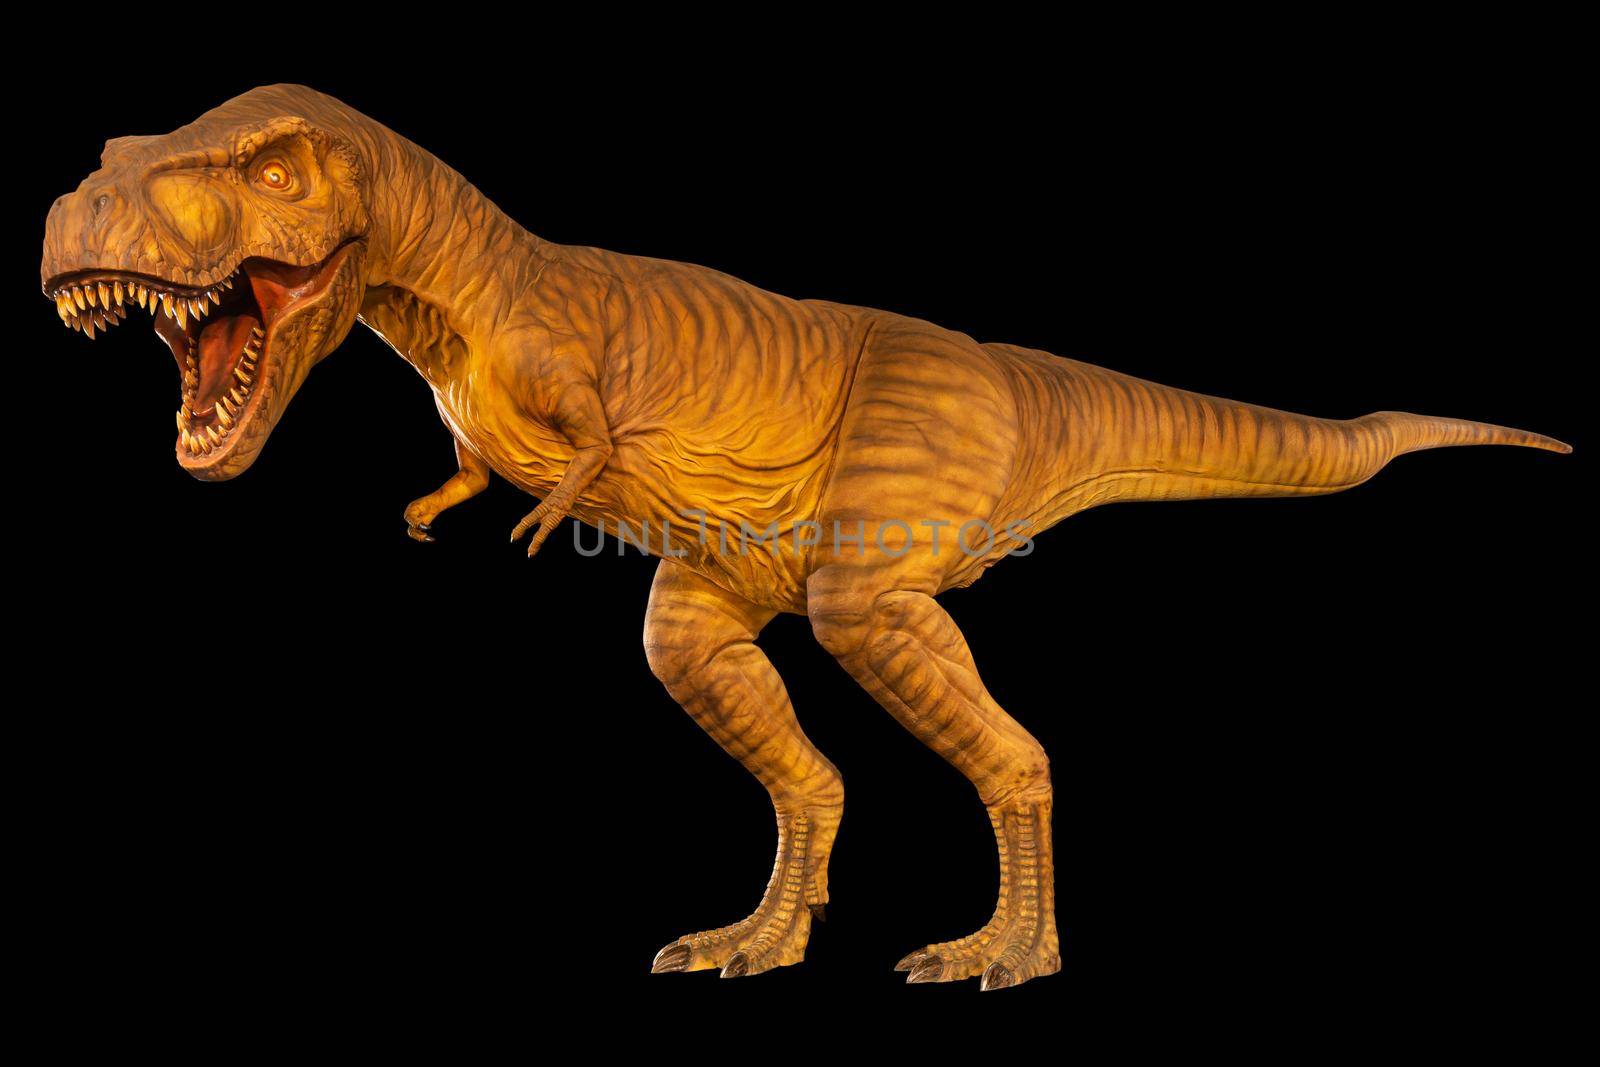 Tyrannosaurus rex ( T-rex ) is walking and open mouth . Side view . Black isolated background . Dinosaur in jurassic peroid . Embedded clipping paths .